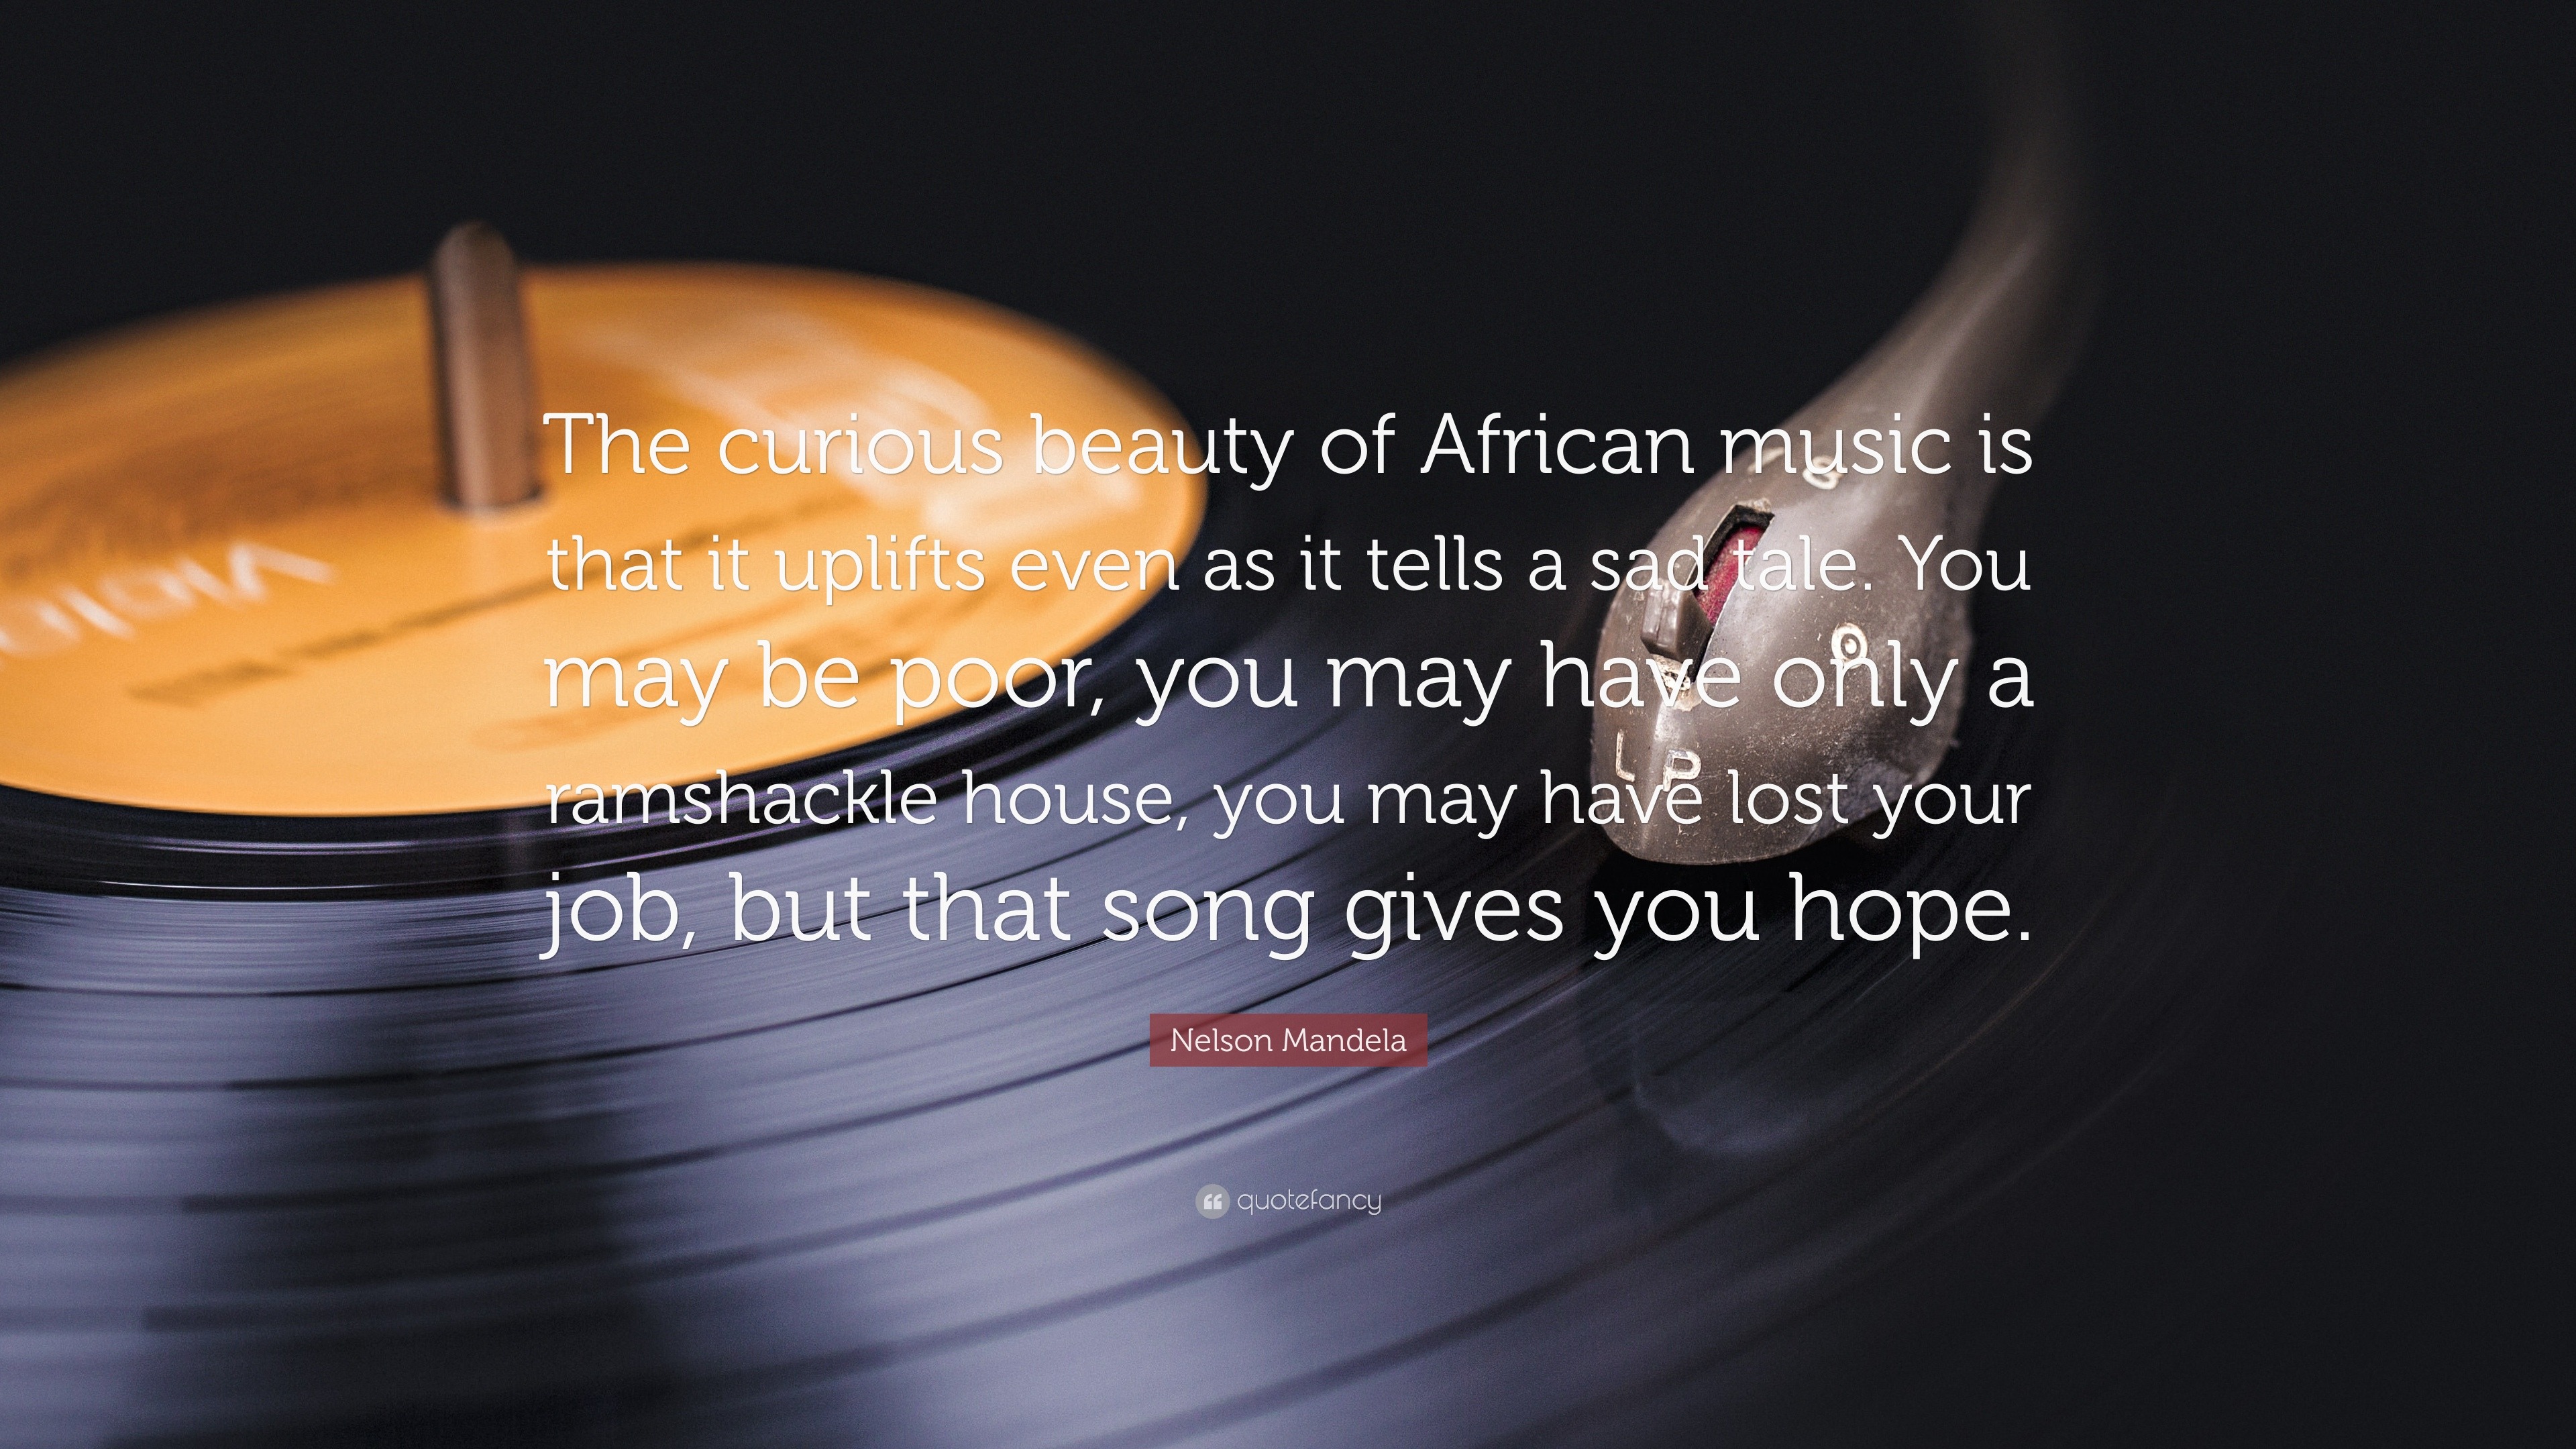 Nelson Mandela Quote The Curious Beauty Of African Music Is That It Uplifts Even As It Tells A Sad Tale You May Be Poor You May Have Only A